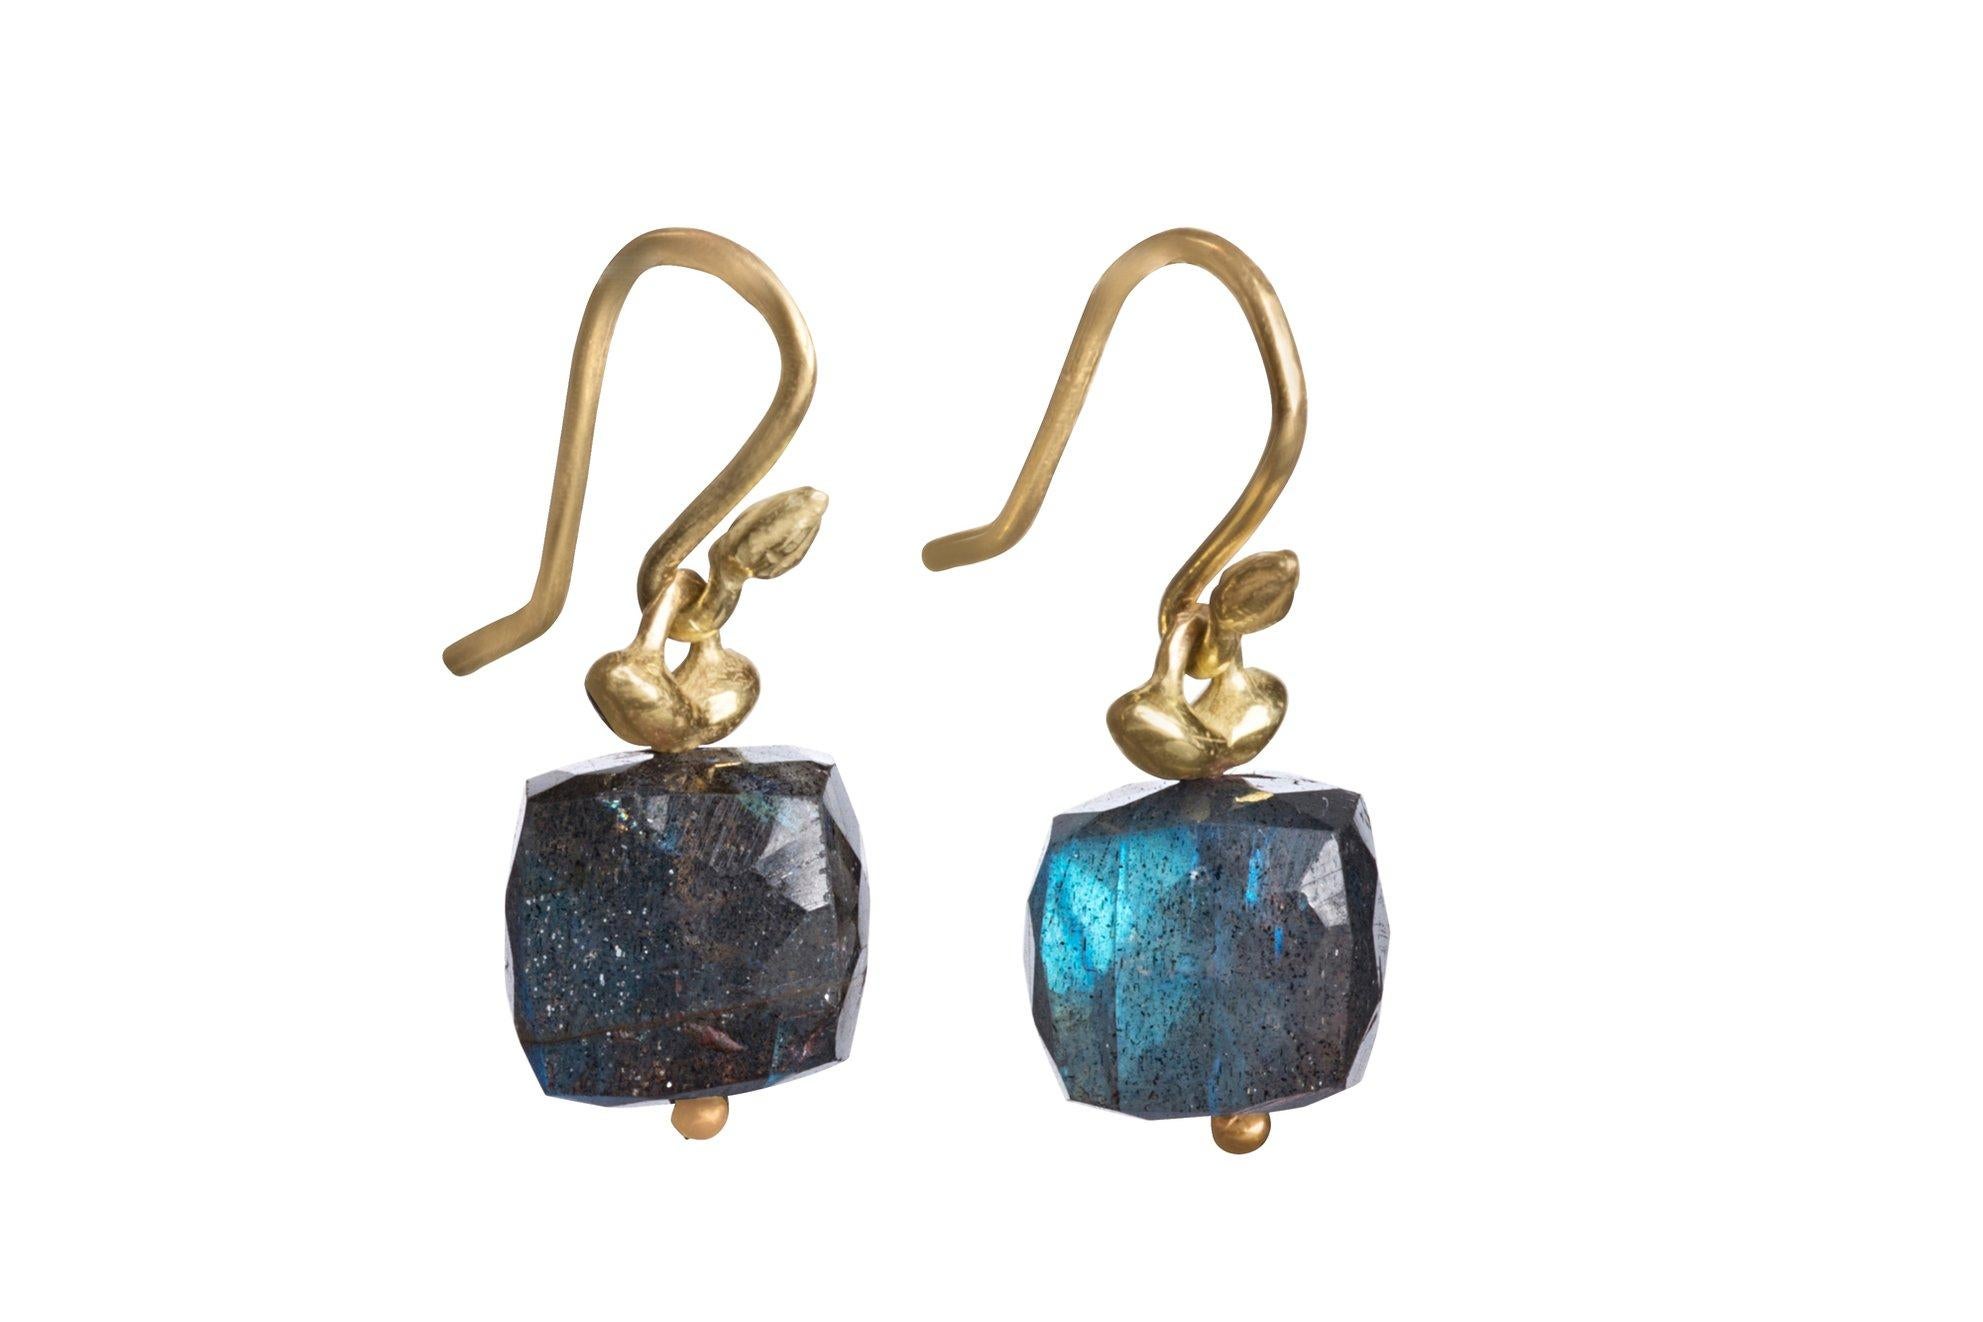 A delcious new idea for a small, everyday earring: stunning labradorite cubes, shedding their blue flash and shimmer. Set with Gabrielle's smooth double-wing setting, on smooth seed earwires.

9mm faceted labradorite cube (big flash) with18k smooth